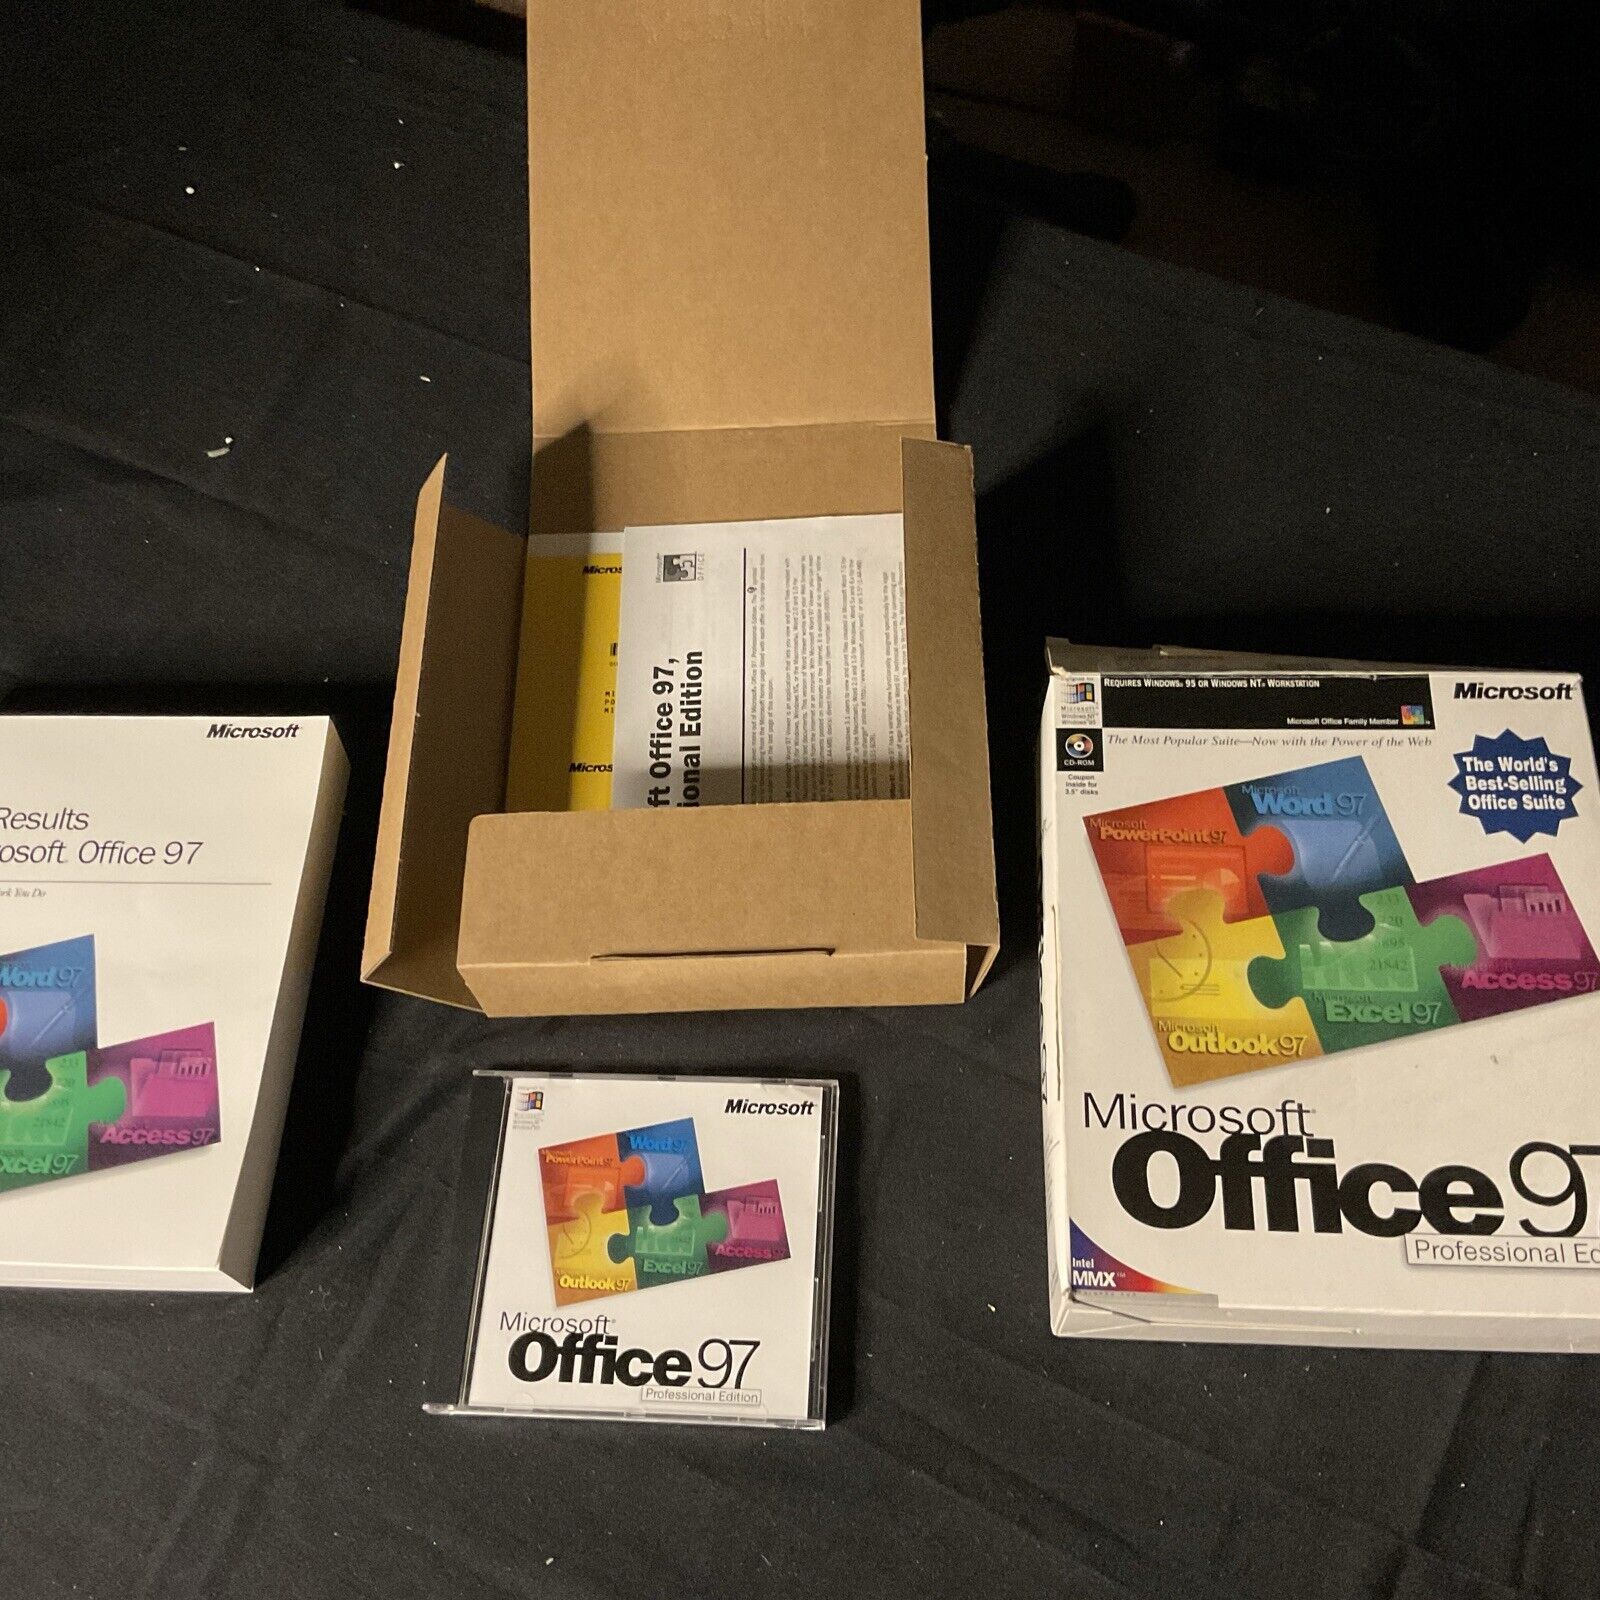 Microsoft Office 97 Professional Edition Big Box comes with product key